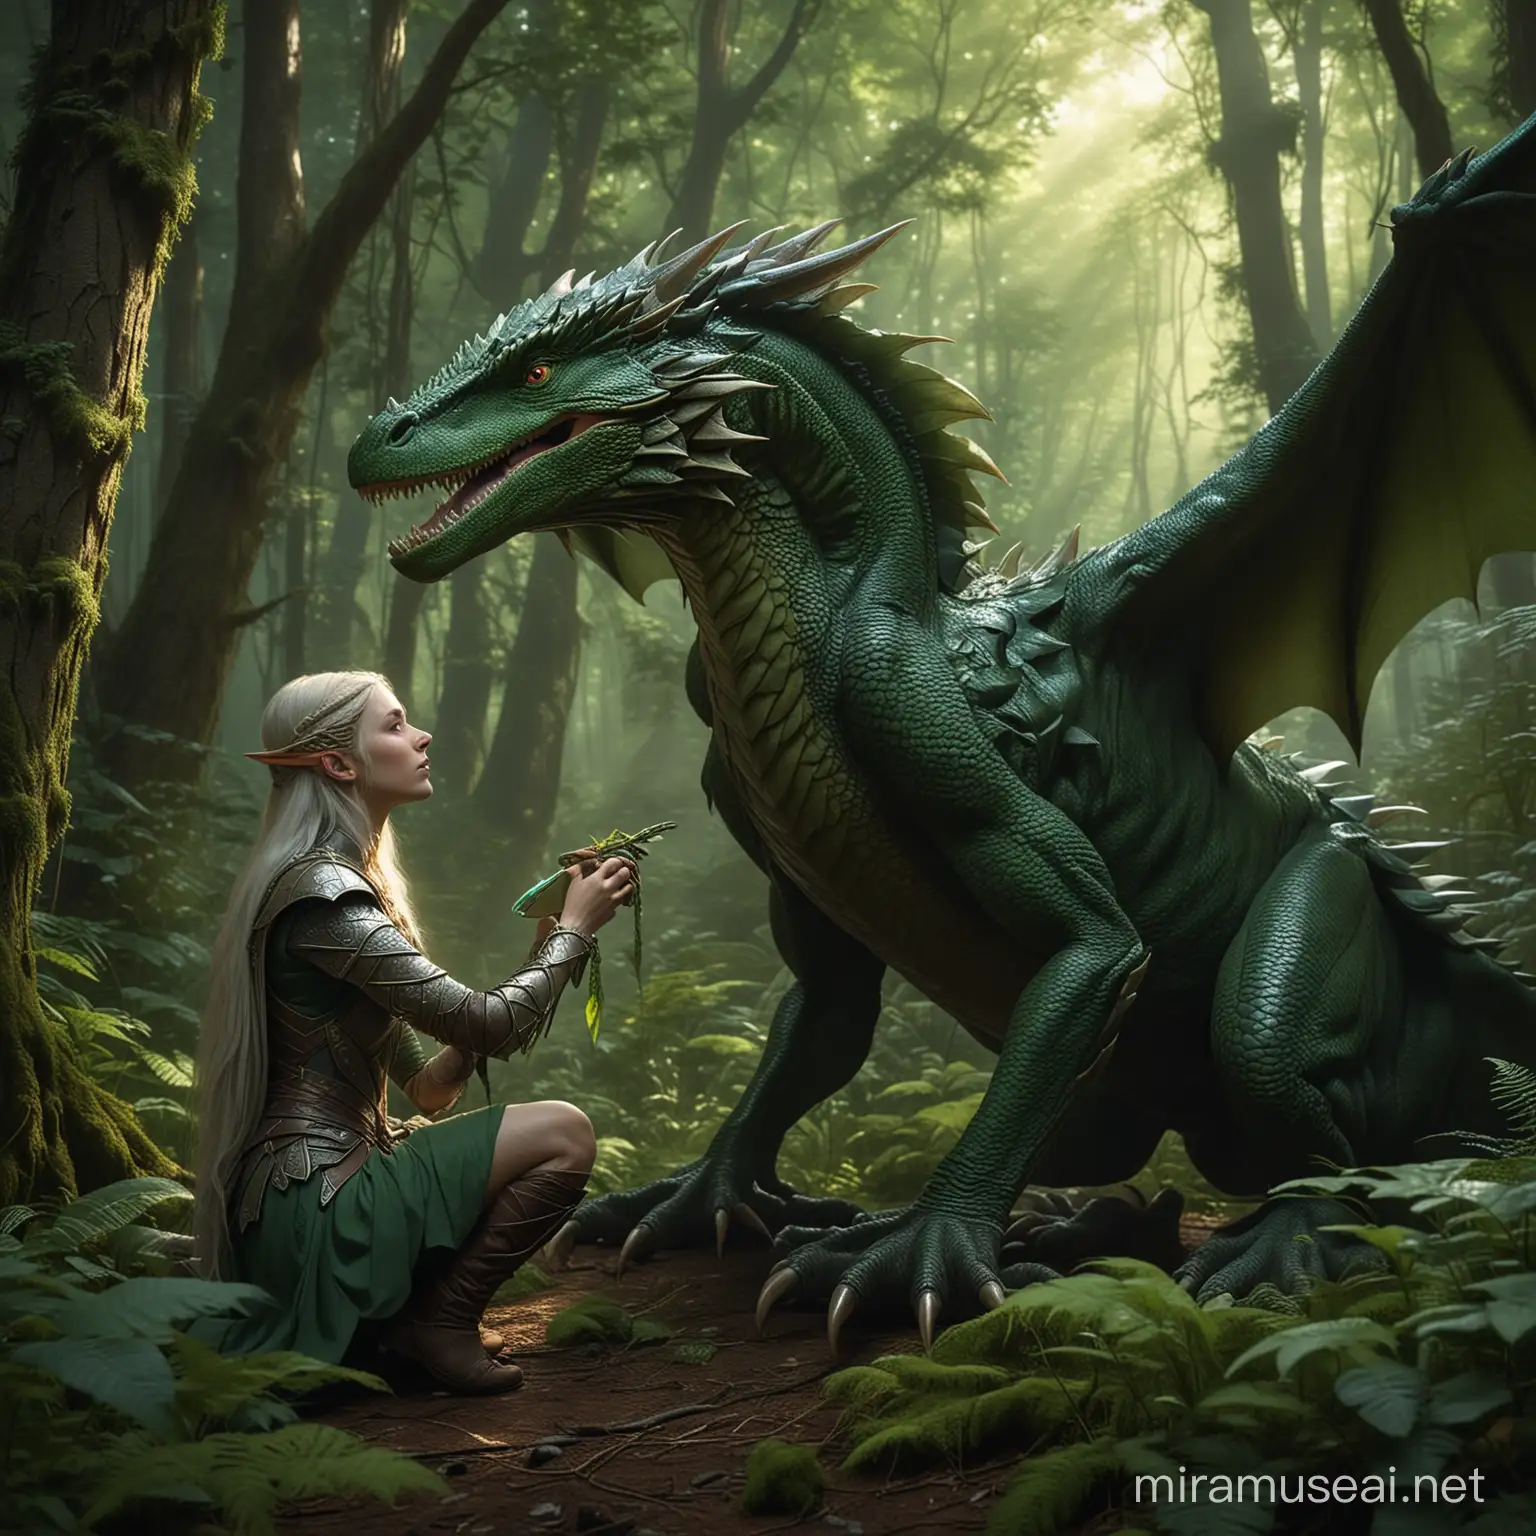 create an image in the style of artist Dan Volbert. An elven warrior petting a large green drake in a forest, ambient lighting 